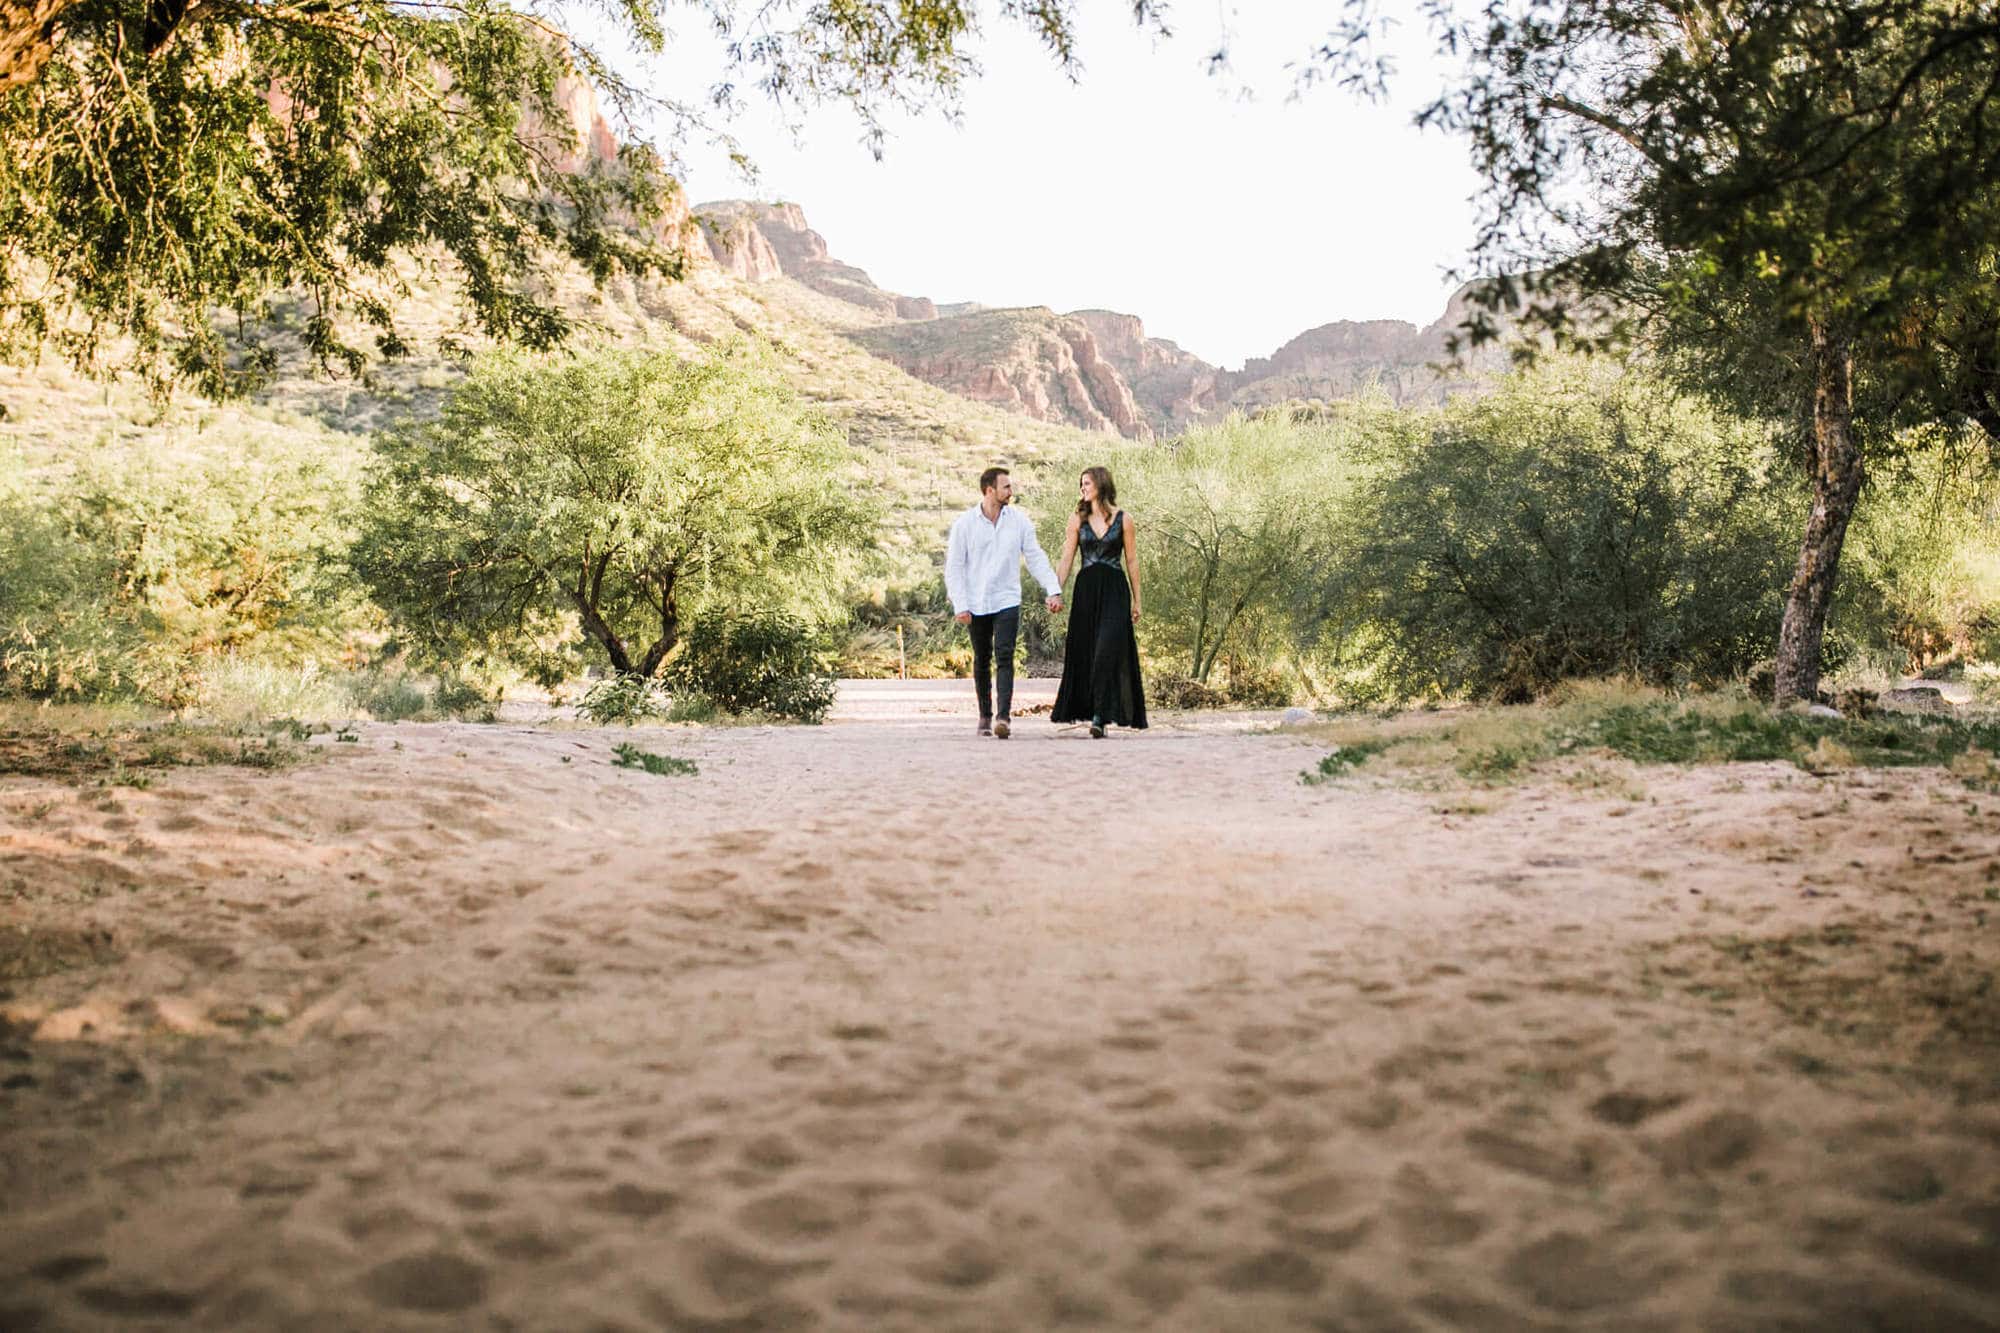 The couple walks on a sandy pathway through some trees. The  desert mountains glow behind them.